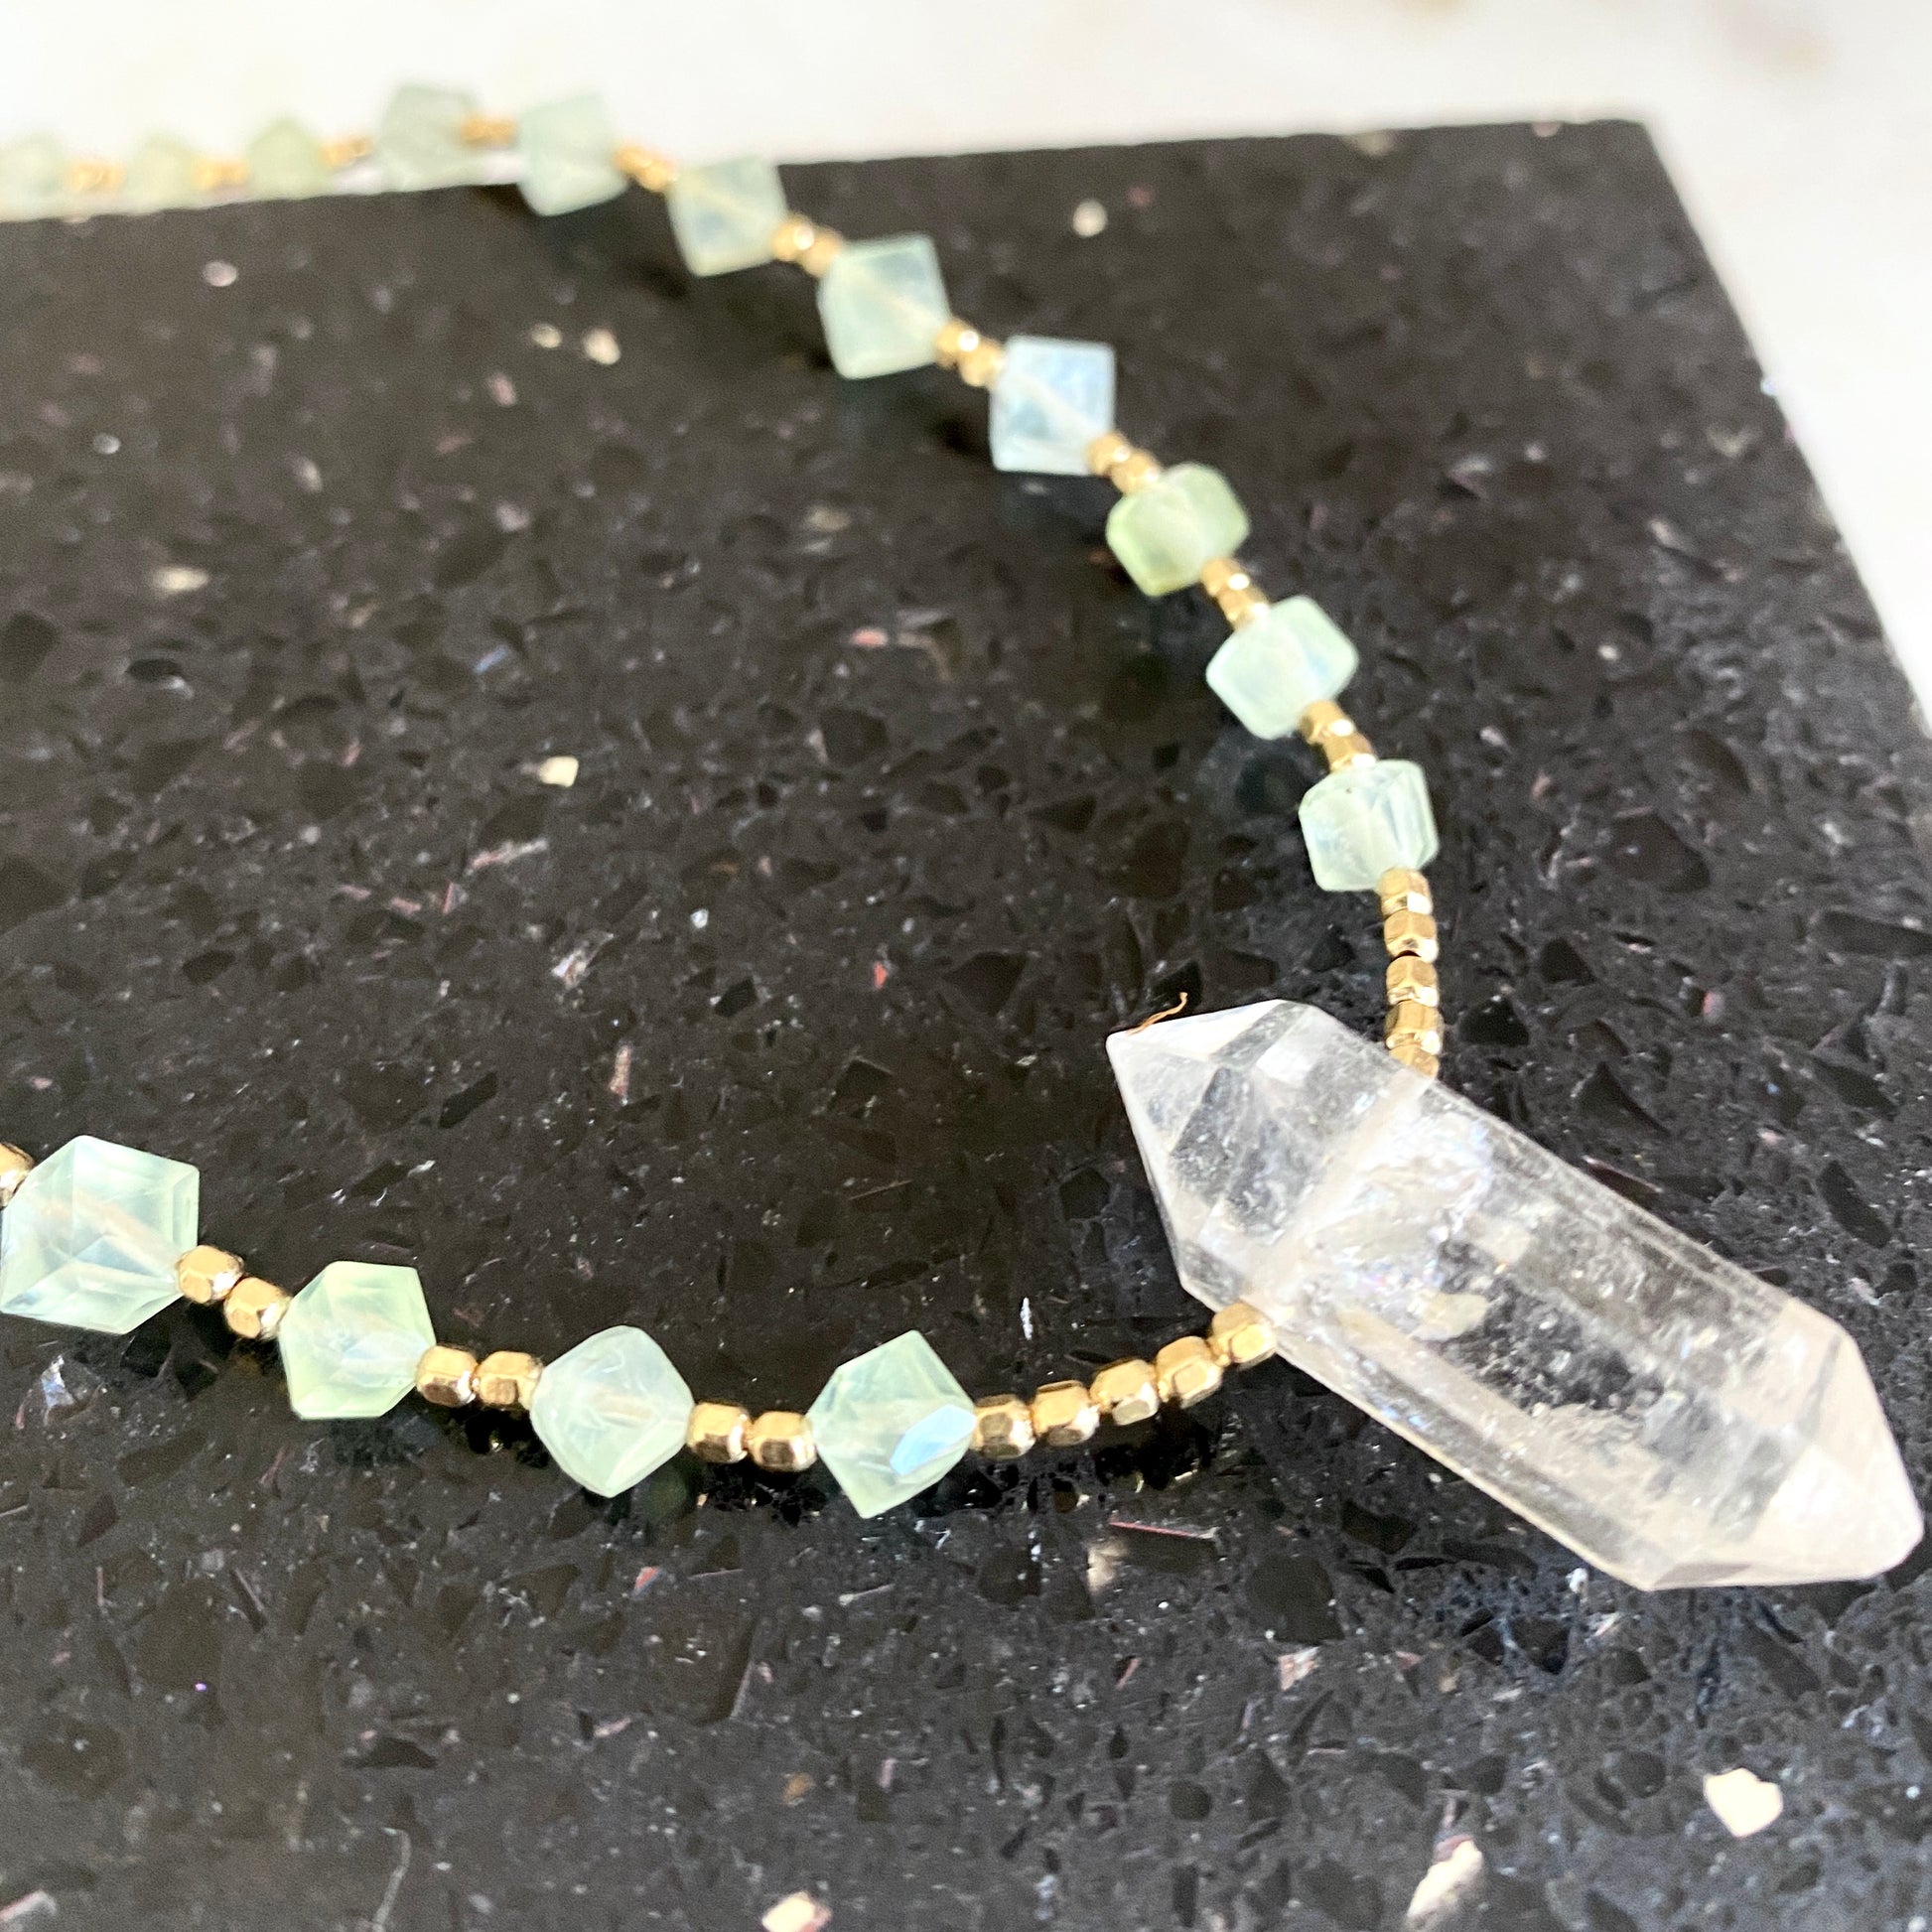 Green geometric prehnite gemstone necklace with Herkimer diamond pendant. 22.5" necklace with 14K gold toggle closure.